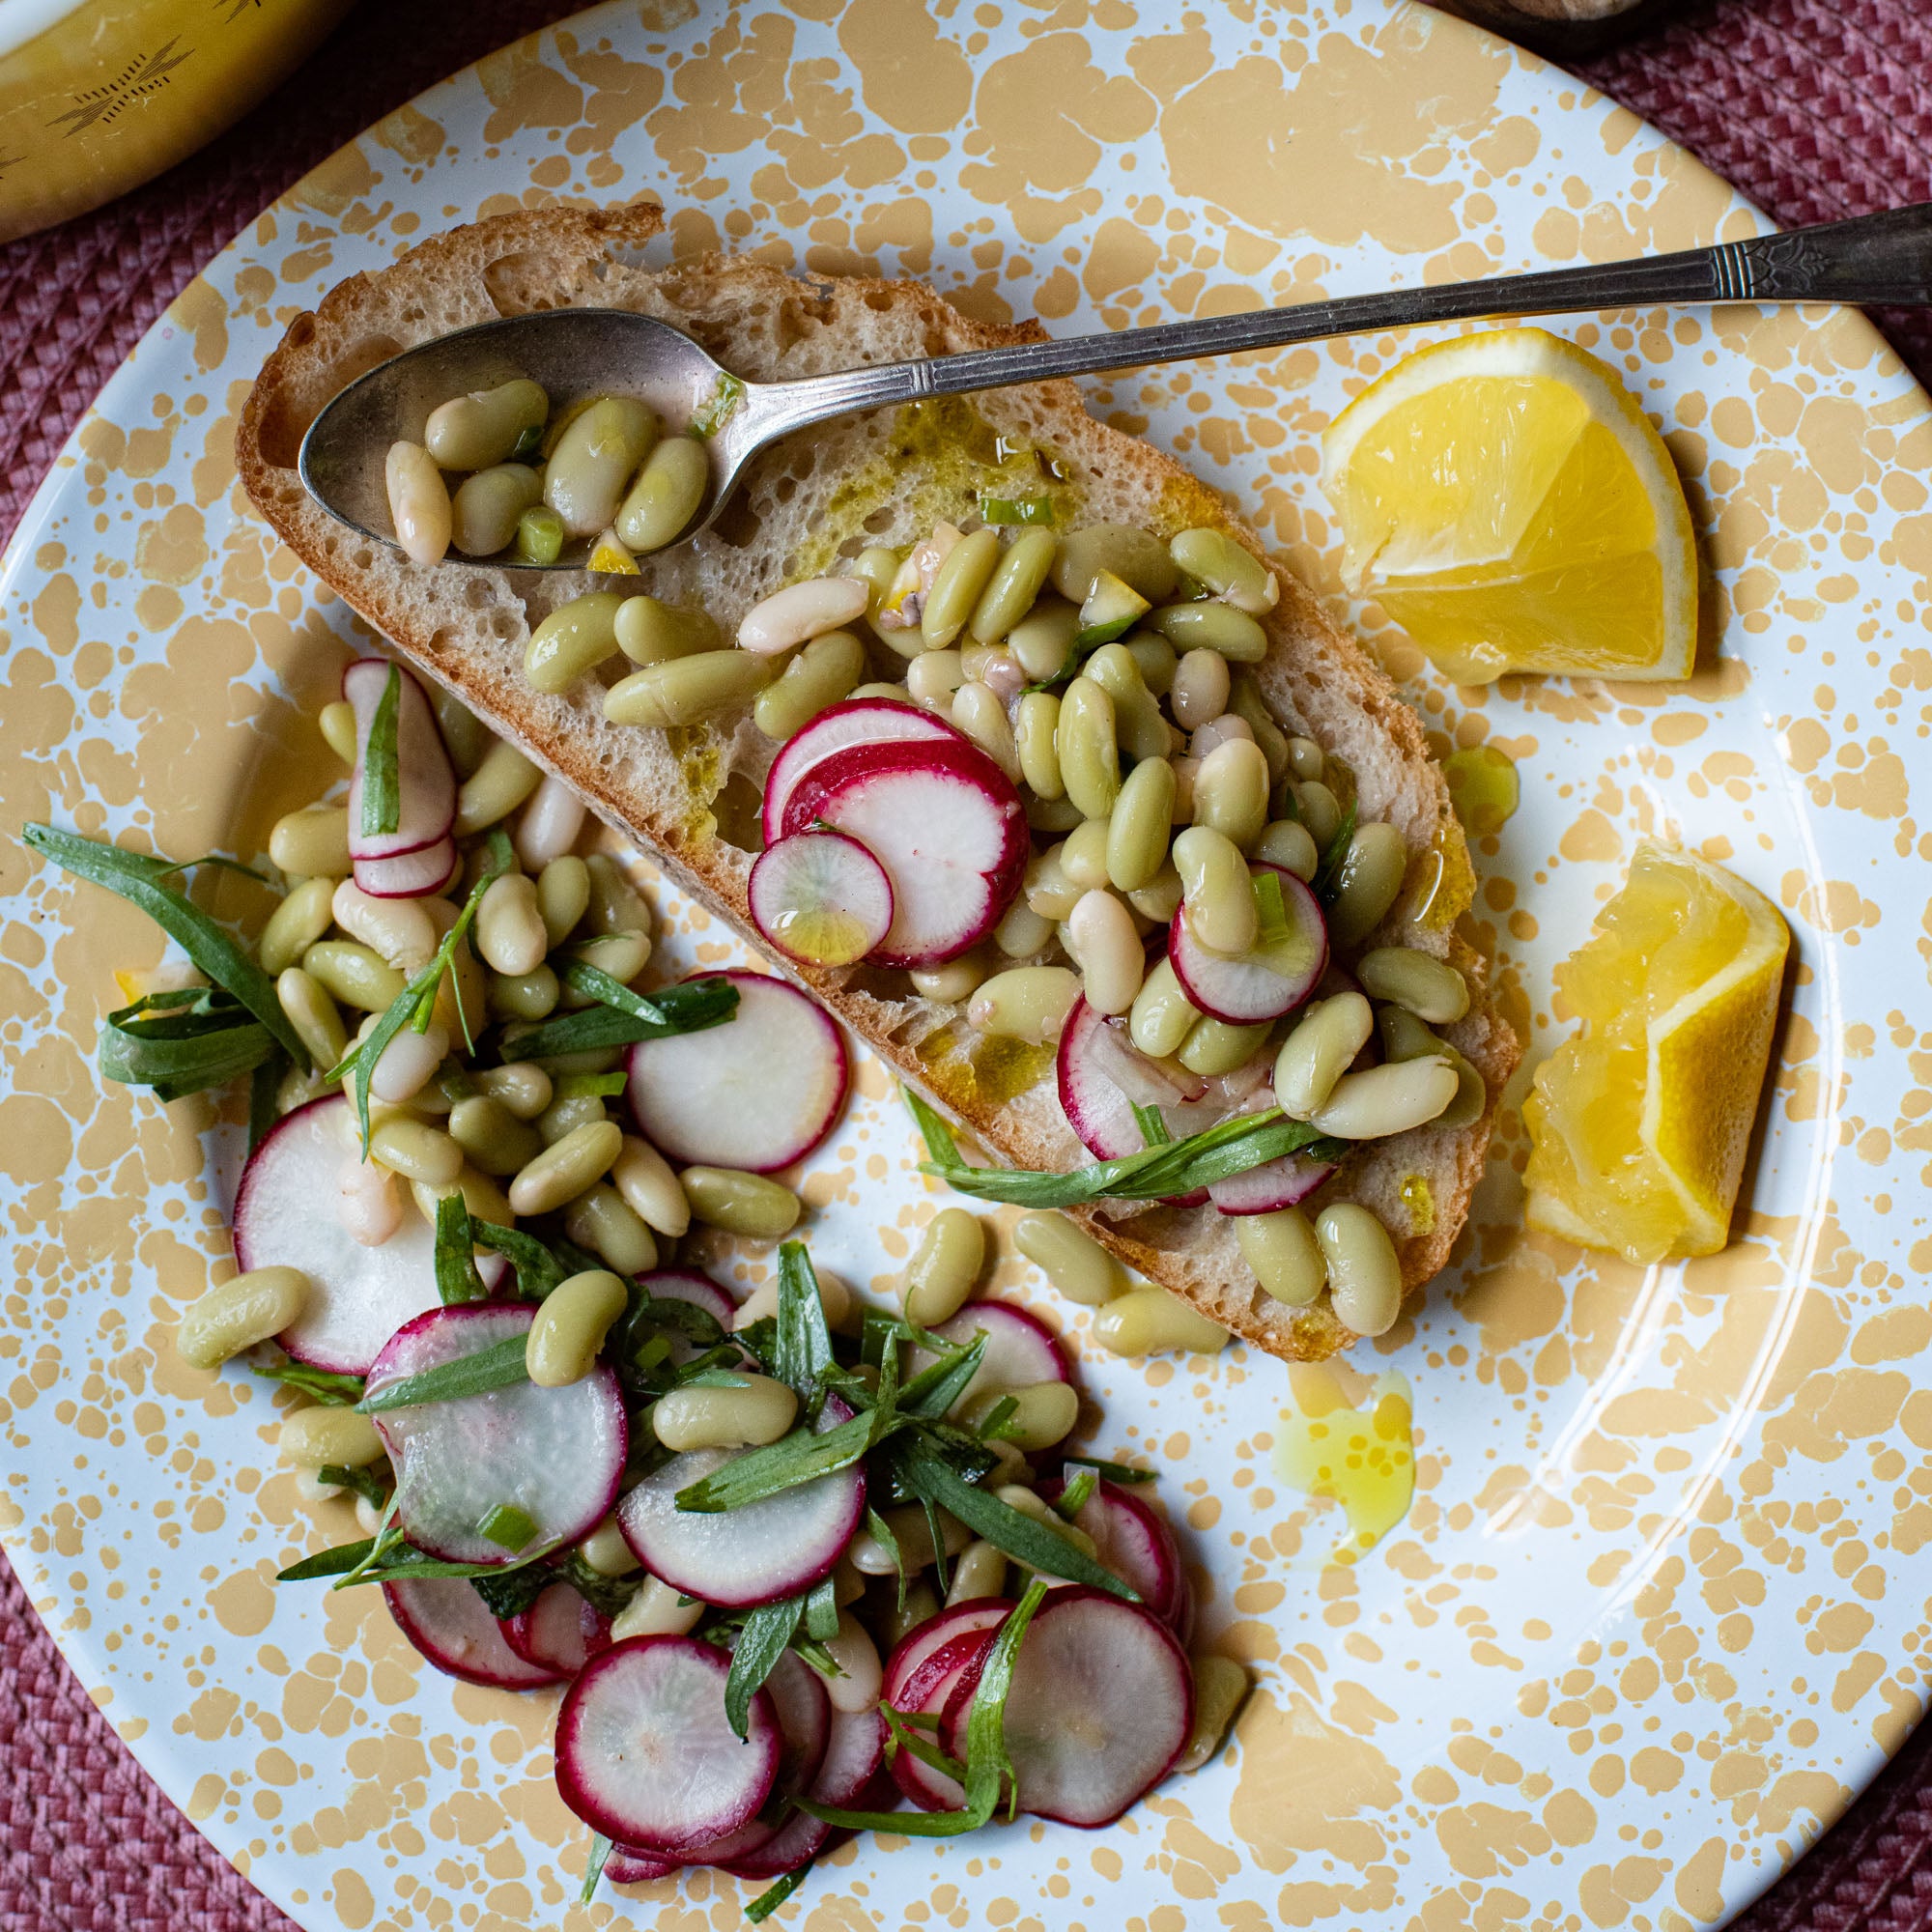 Beans on toast with Primary Beans Organic Flageolet beans